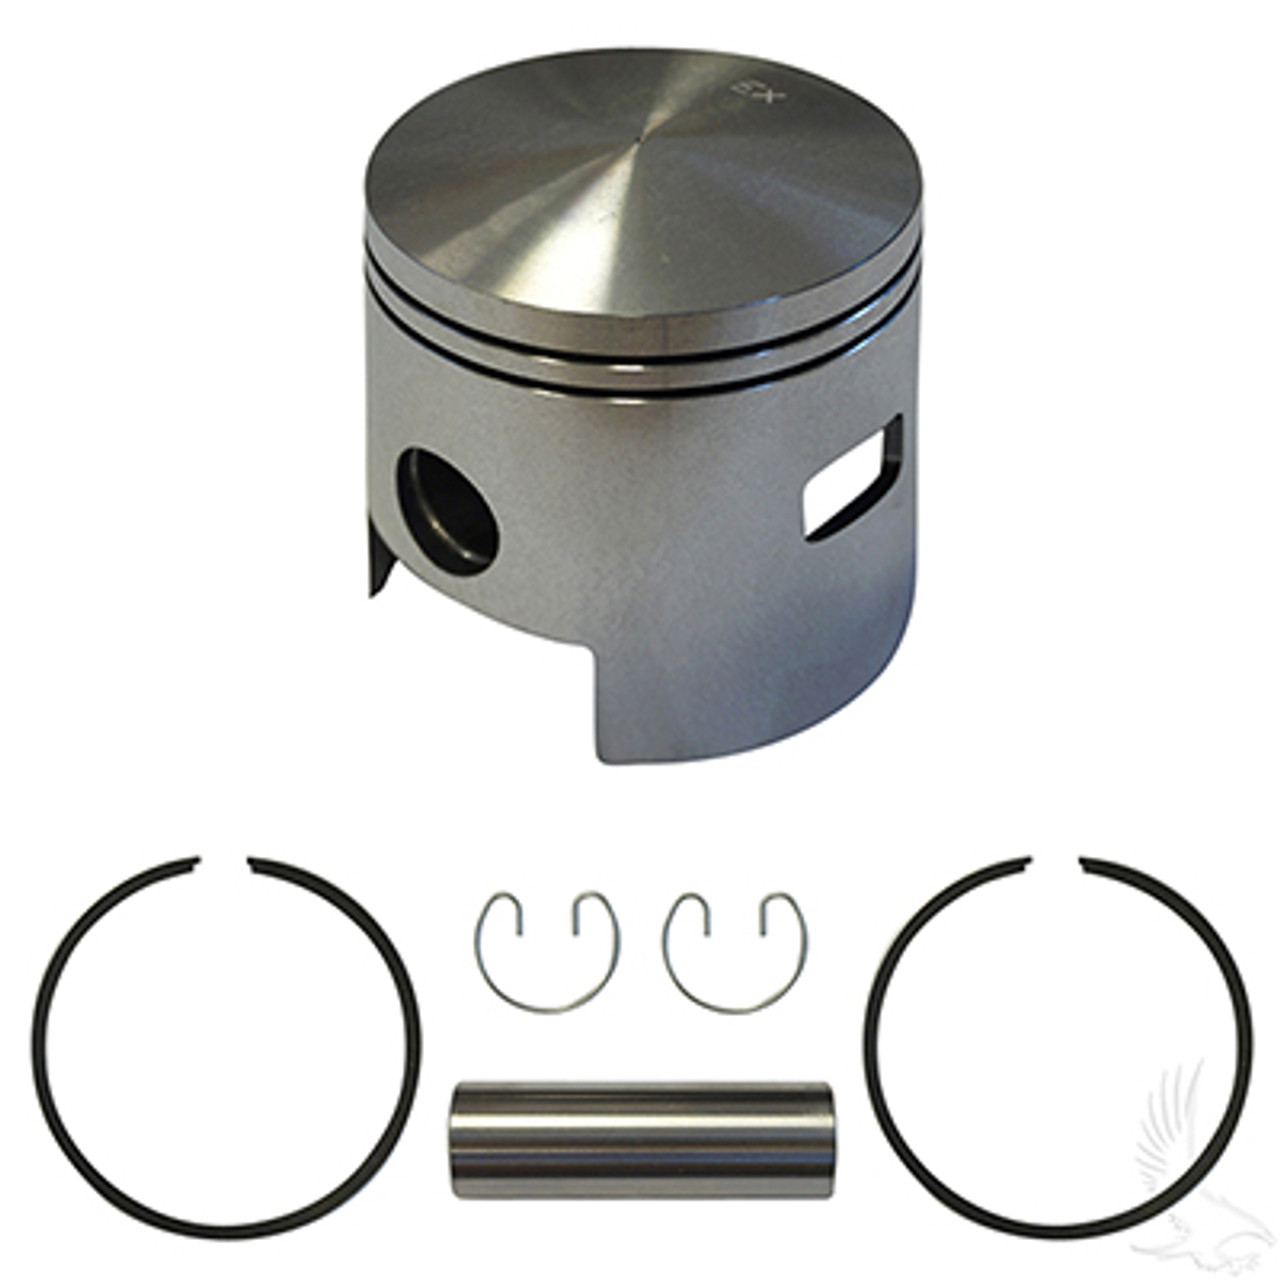 Piston and Ring Assembly, One Port +.50mm - EZGO Golf Cart 2-Cycle Gas 1980-1988, ENG-149, 14994G3, 14997G3, 24514G3, 26519G03 , 4592